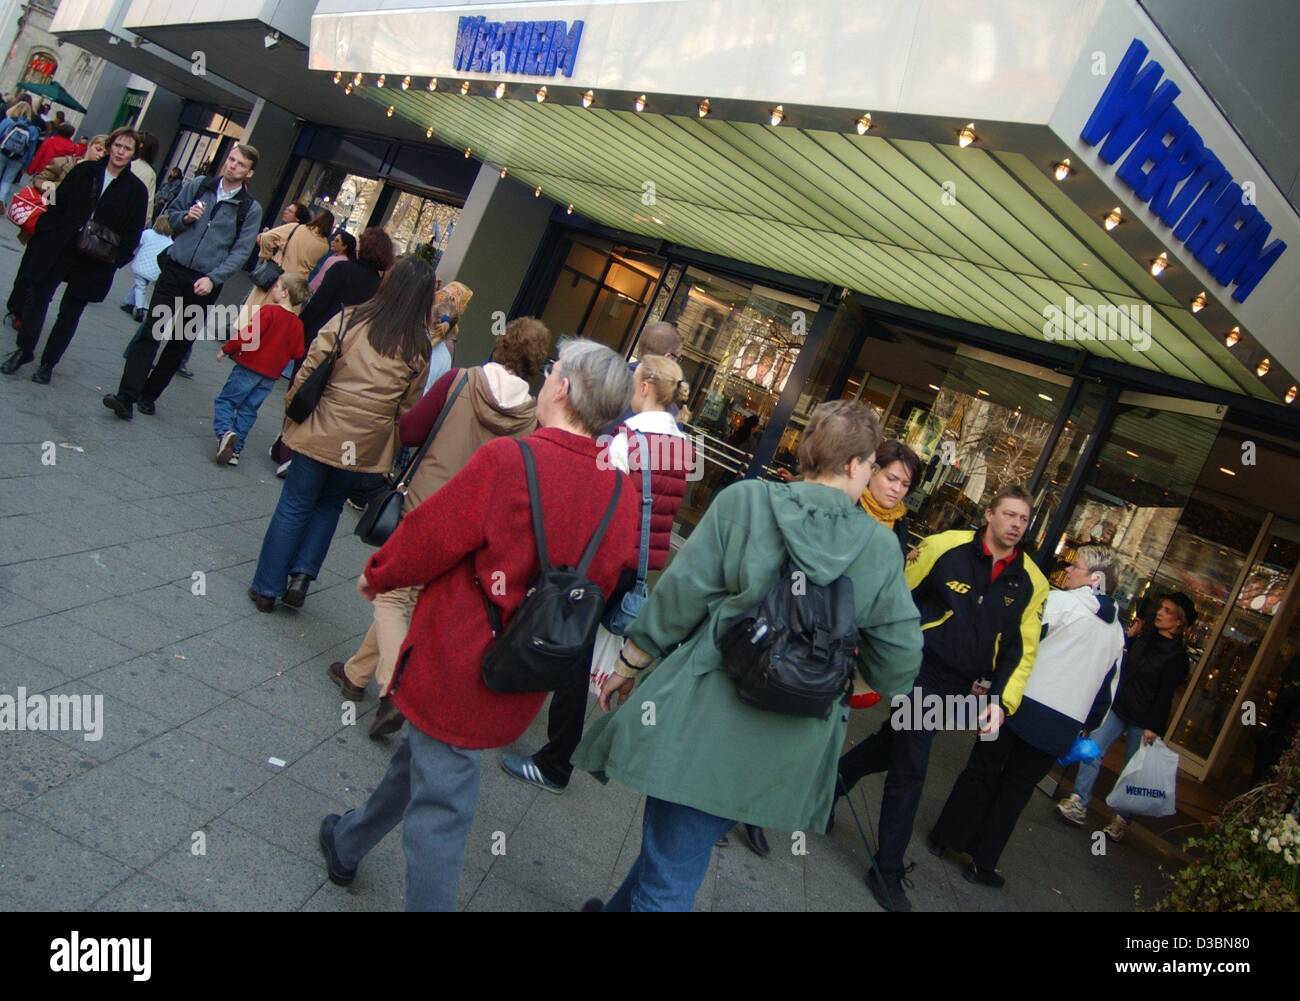 (dpa) - People walk past the Wertheim department store in Berlin, 14 April 2003. The department store, which belongs to the German department store chain KarstadtQuelle, still carries the name of its founder. Presently, a U.S. Federal Court judge is weighing Karstadt-Quelle's request to throw out a  Stock Photo